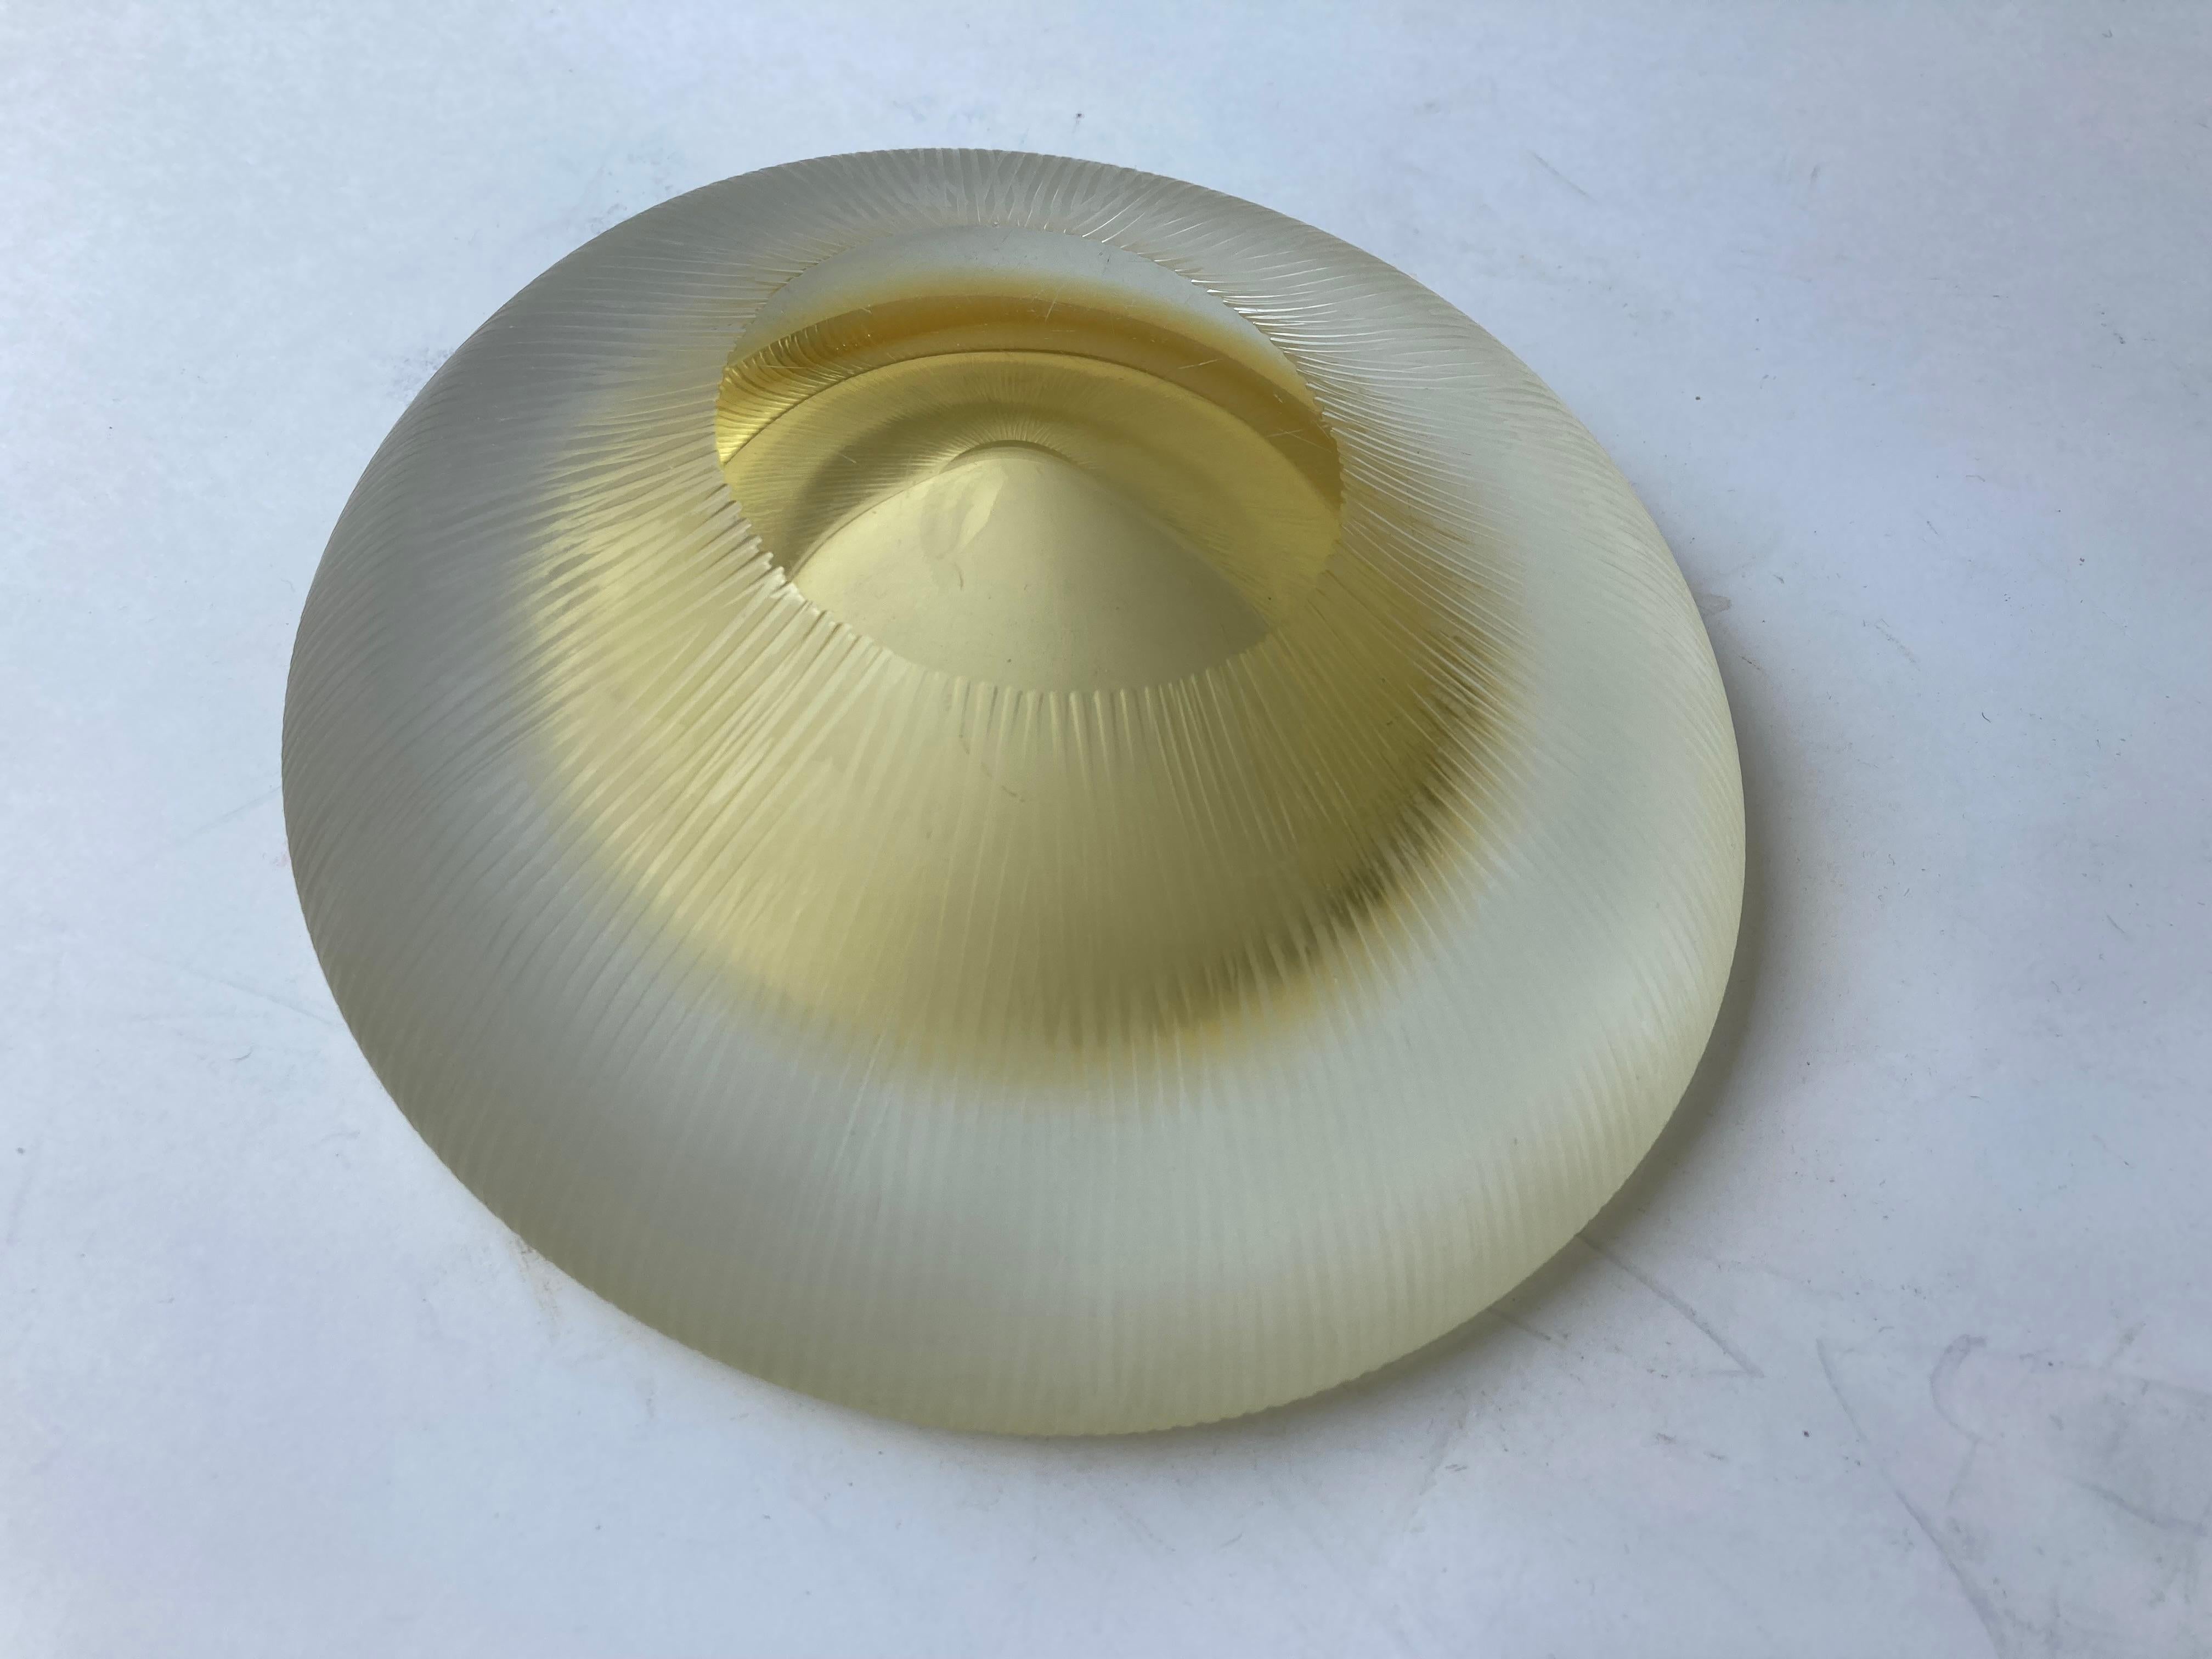 Very nice technique of hand carved parallel lines in a thick sasso glass shape with a yellow inside and top and bottom shine polished. Similar sample can be found in a reference book by Hal Meltzer Collection book.